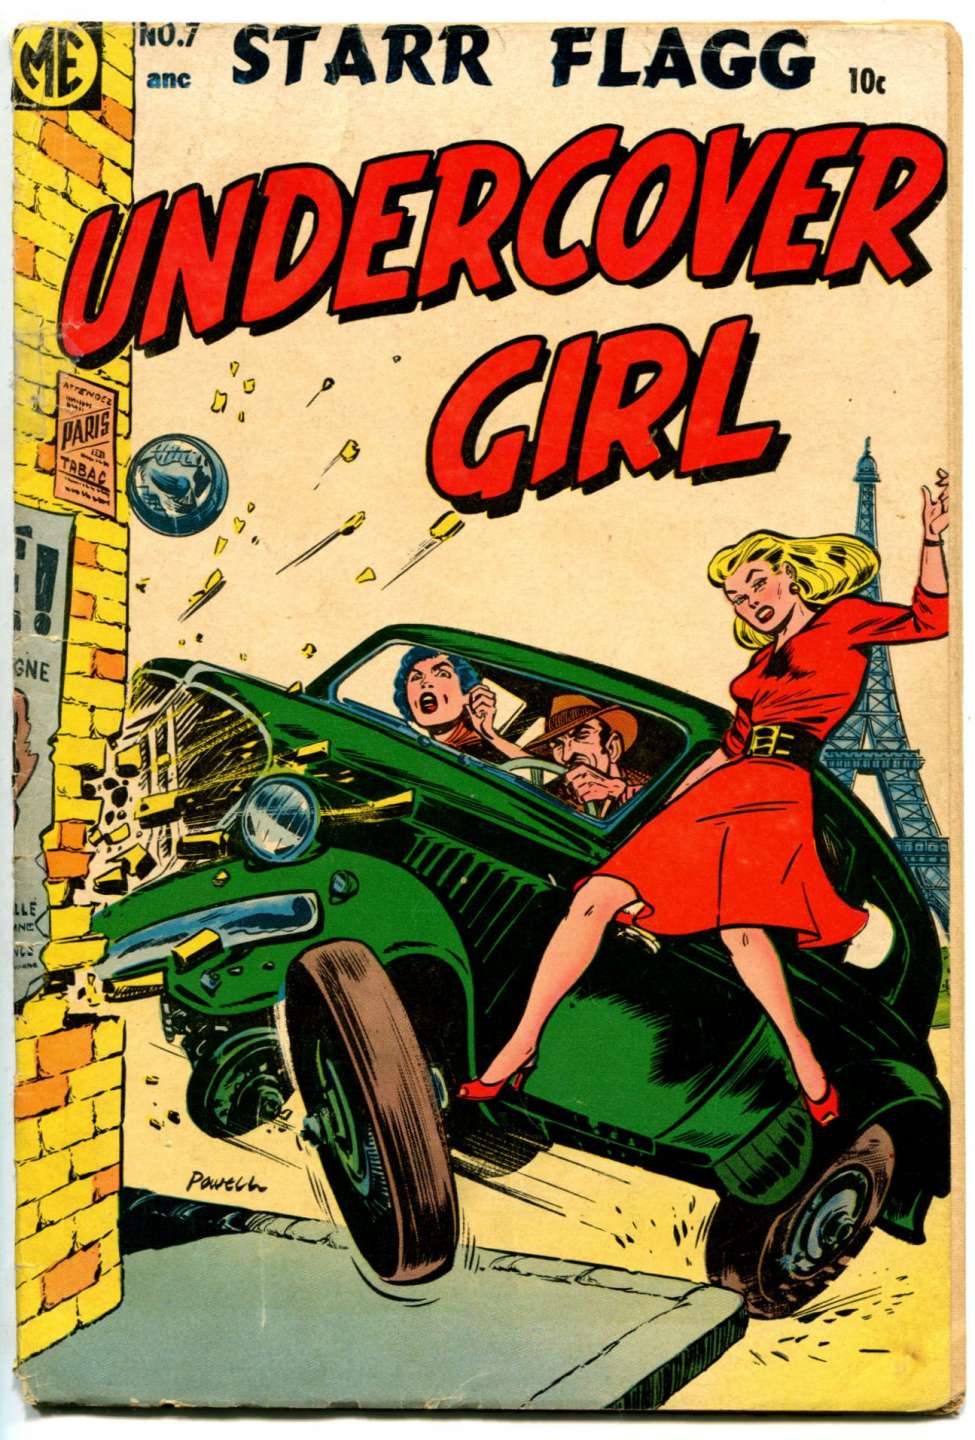 Book Cover For Undercover Girl 7 (A1 118)